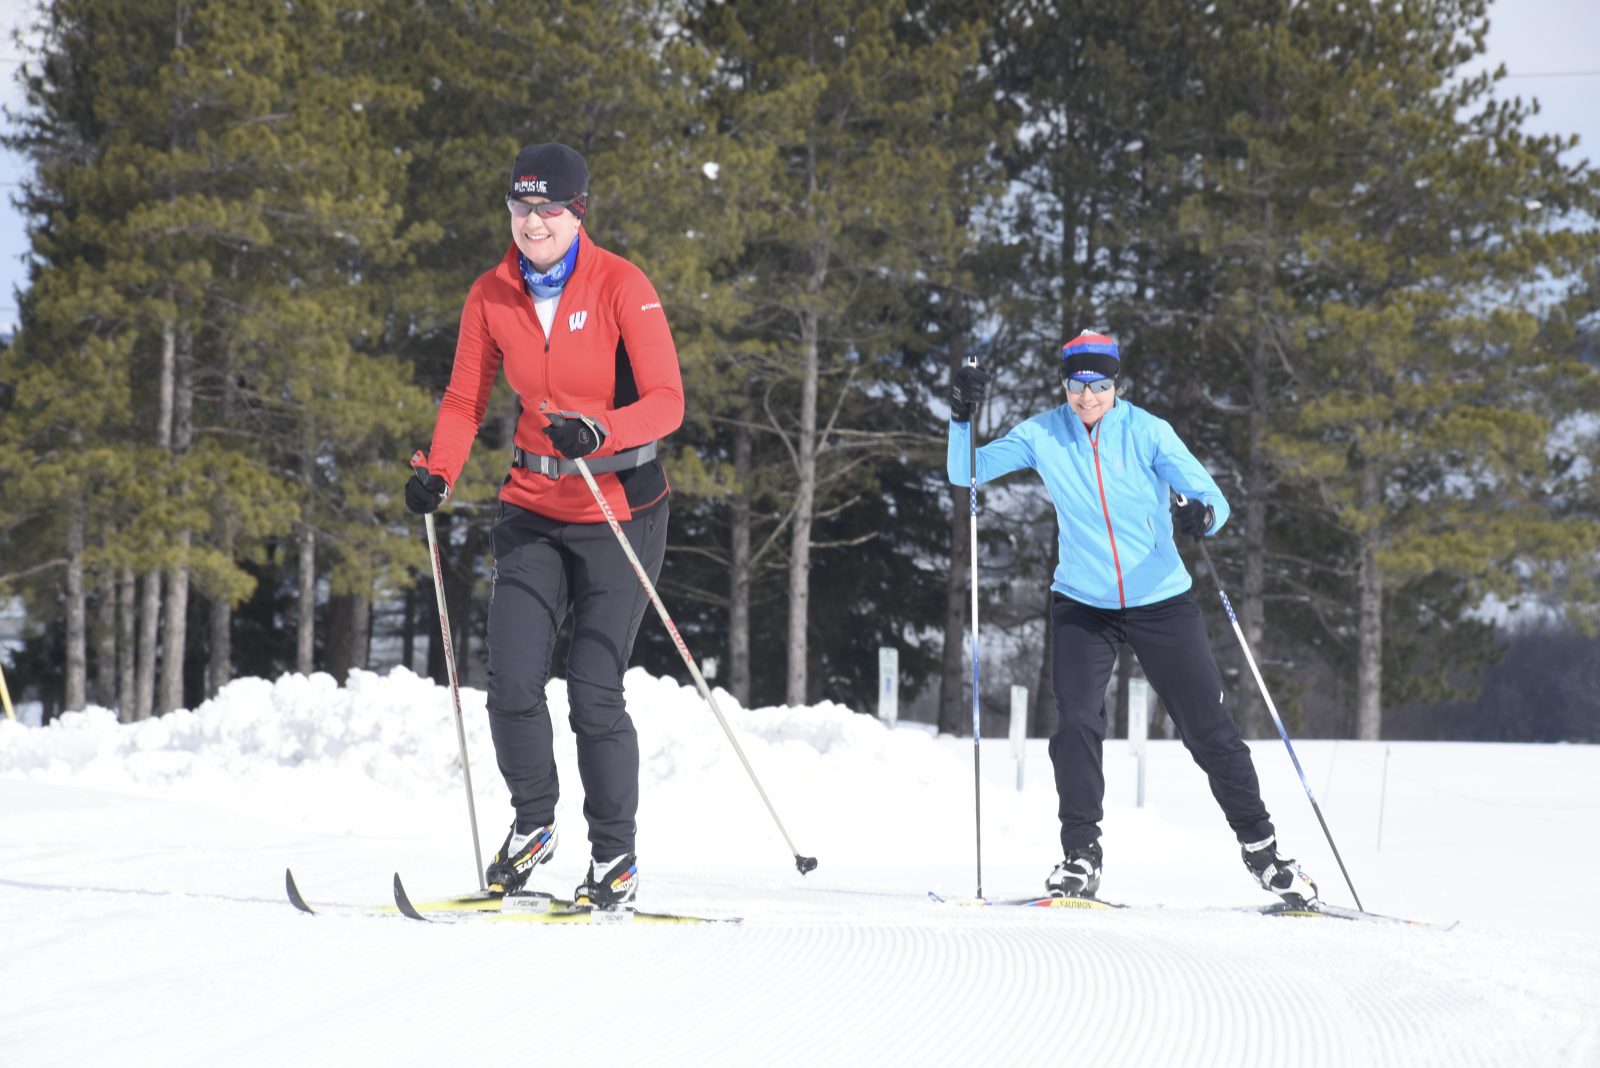 Two people on skis in the snow.